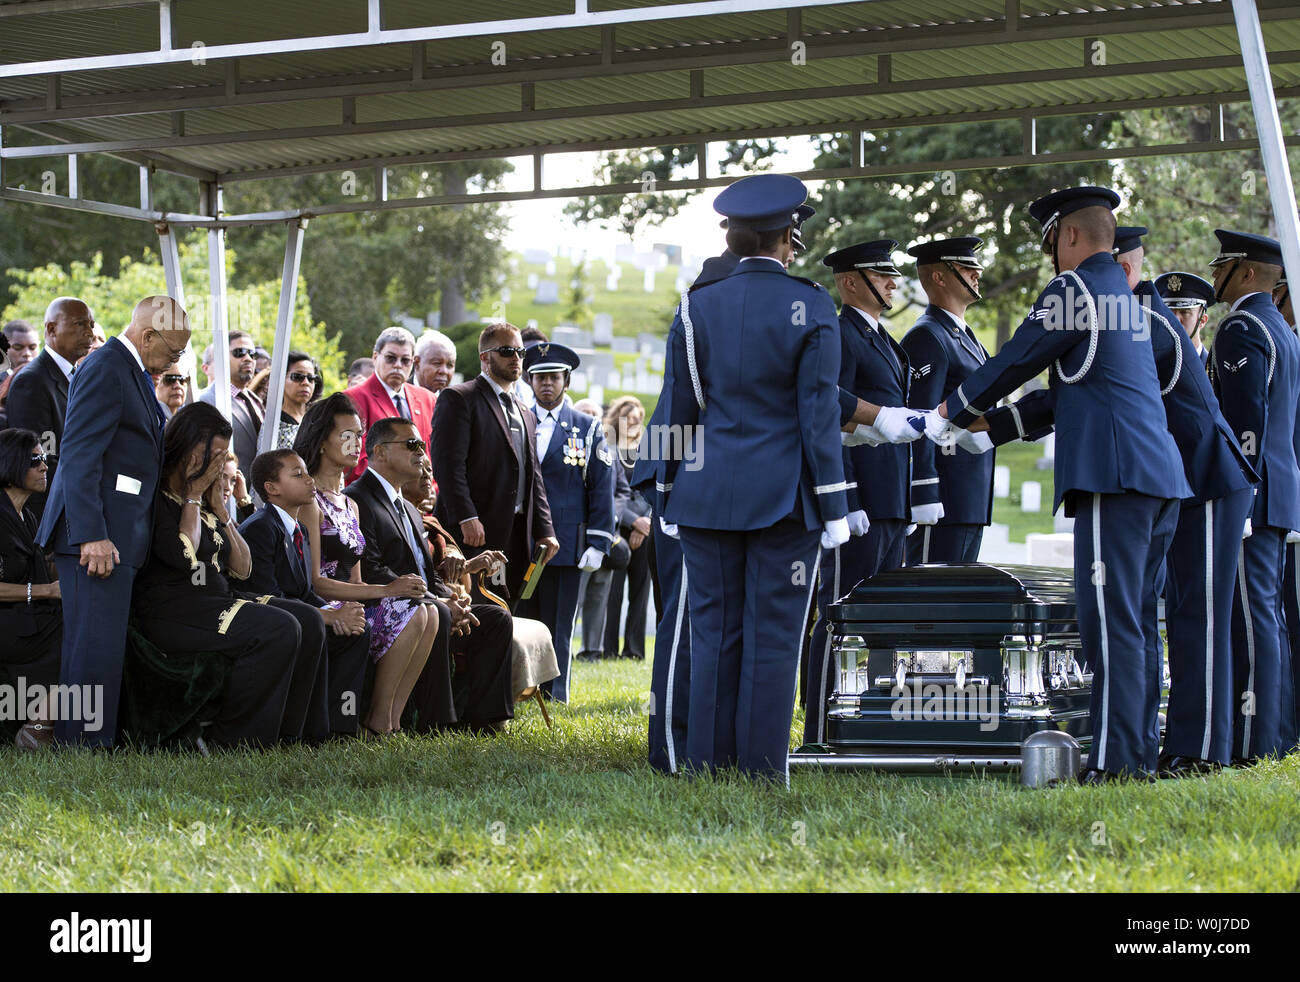 An Air Force Honor Guard folds an American flag during the funeral service for U.S. Air Force 2nd Lt., Malvin Greston 'Mal' Whitfield, at Arlington National Cemetery in Arlington, Virginia on June 8, 2016. Whitfield served in the U.S. Army Air Forces in 1943 as a member of the Tuskegee Airmen and was also a five-time Olympic medalist, including three gold. Photo by Kevin Dietsch/UPI Stock Photo